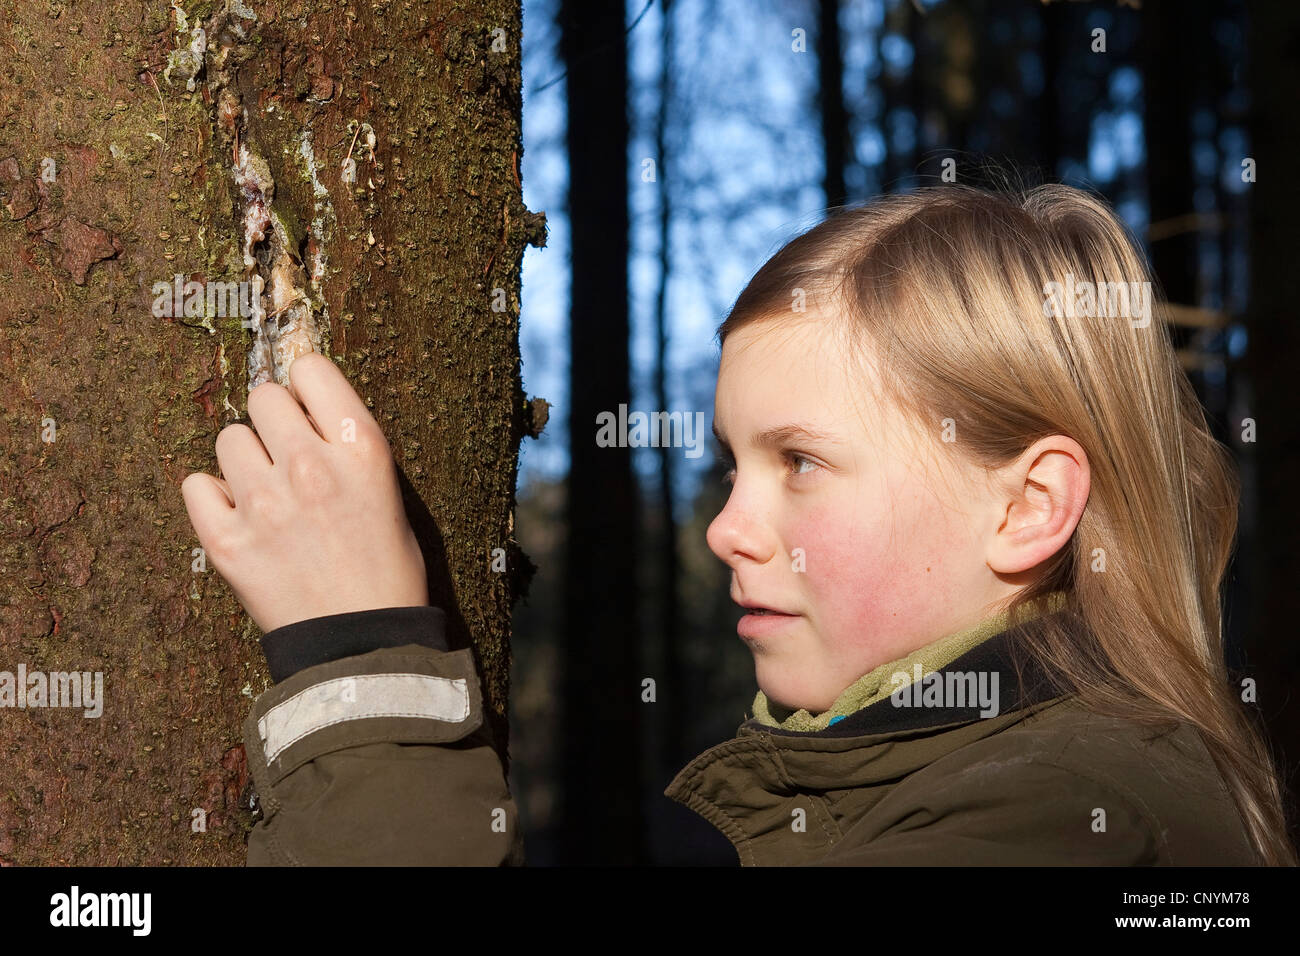 Norway spruce (Picea abies), girl collecting tree gum that run out of a hurt spruce trunk, Germany Stock Photo